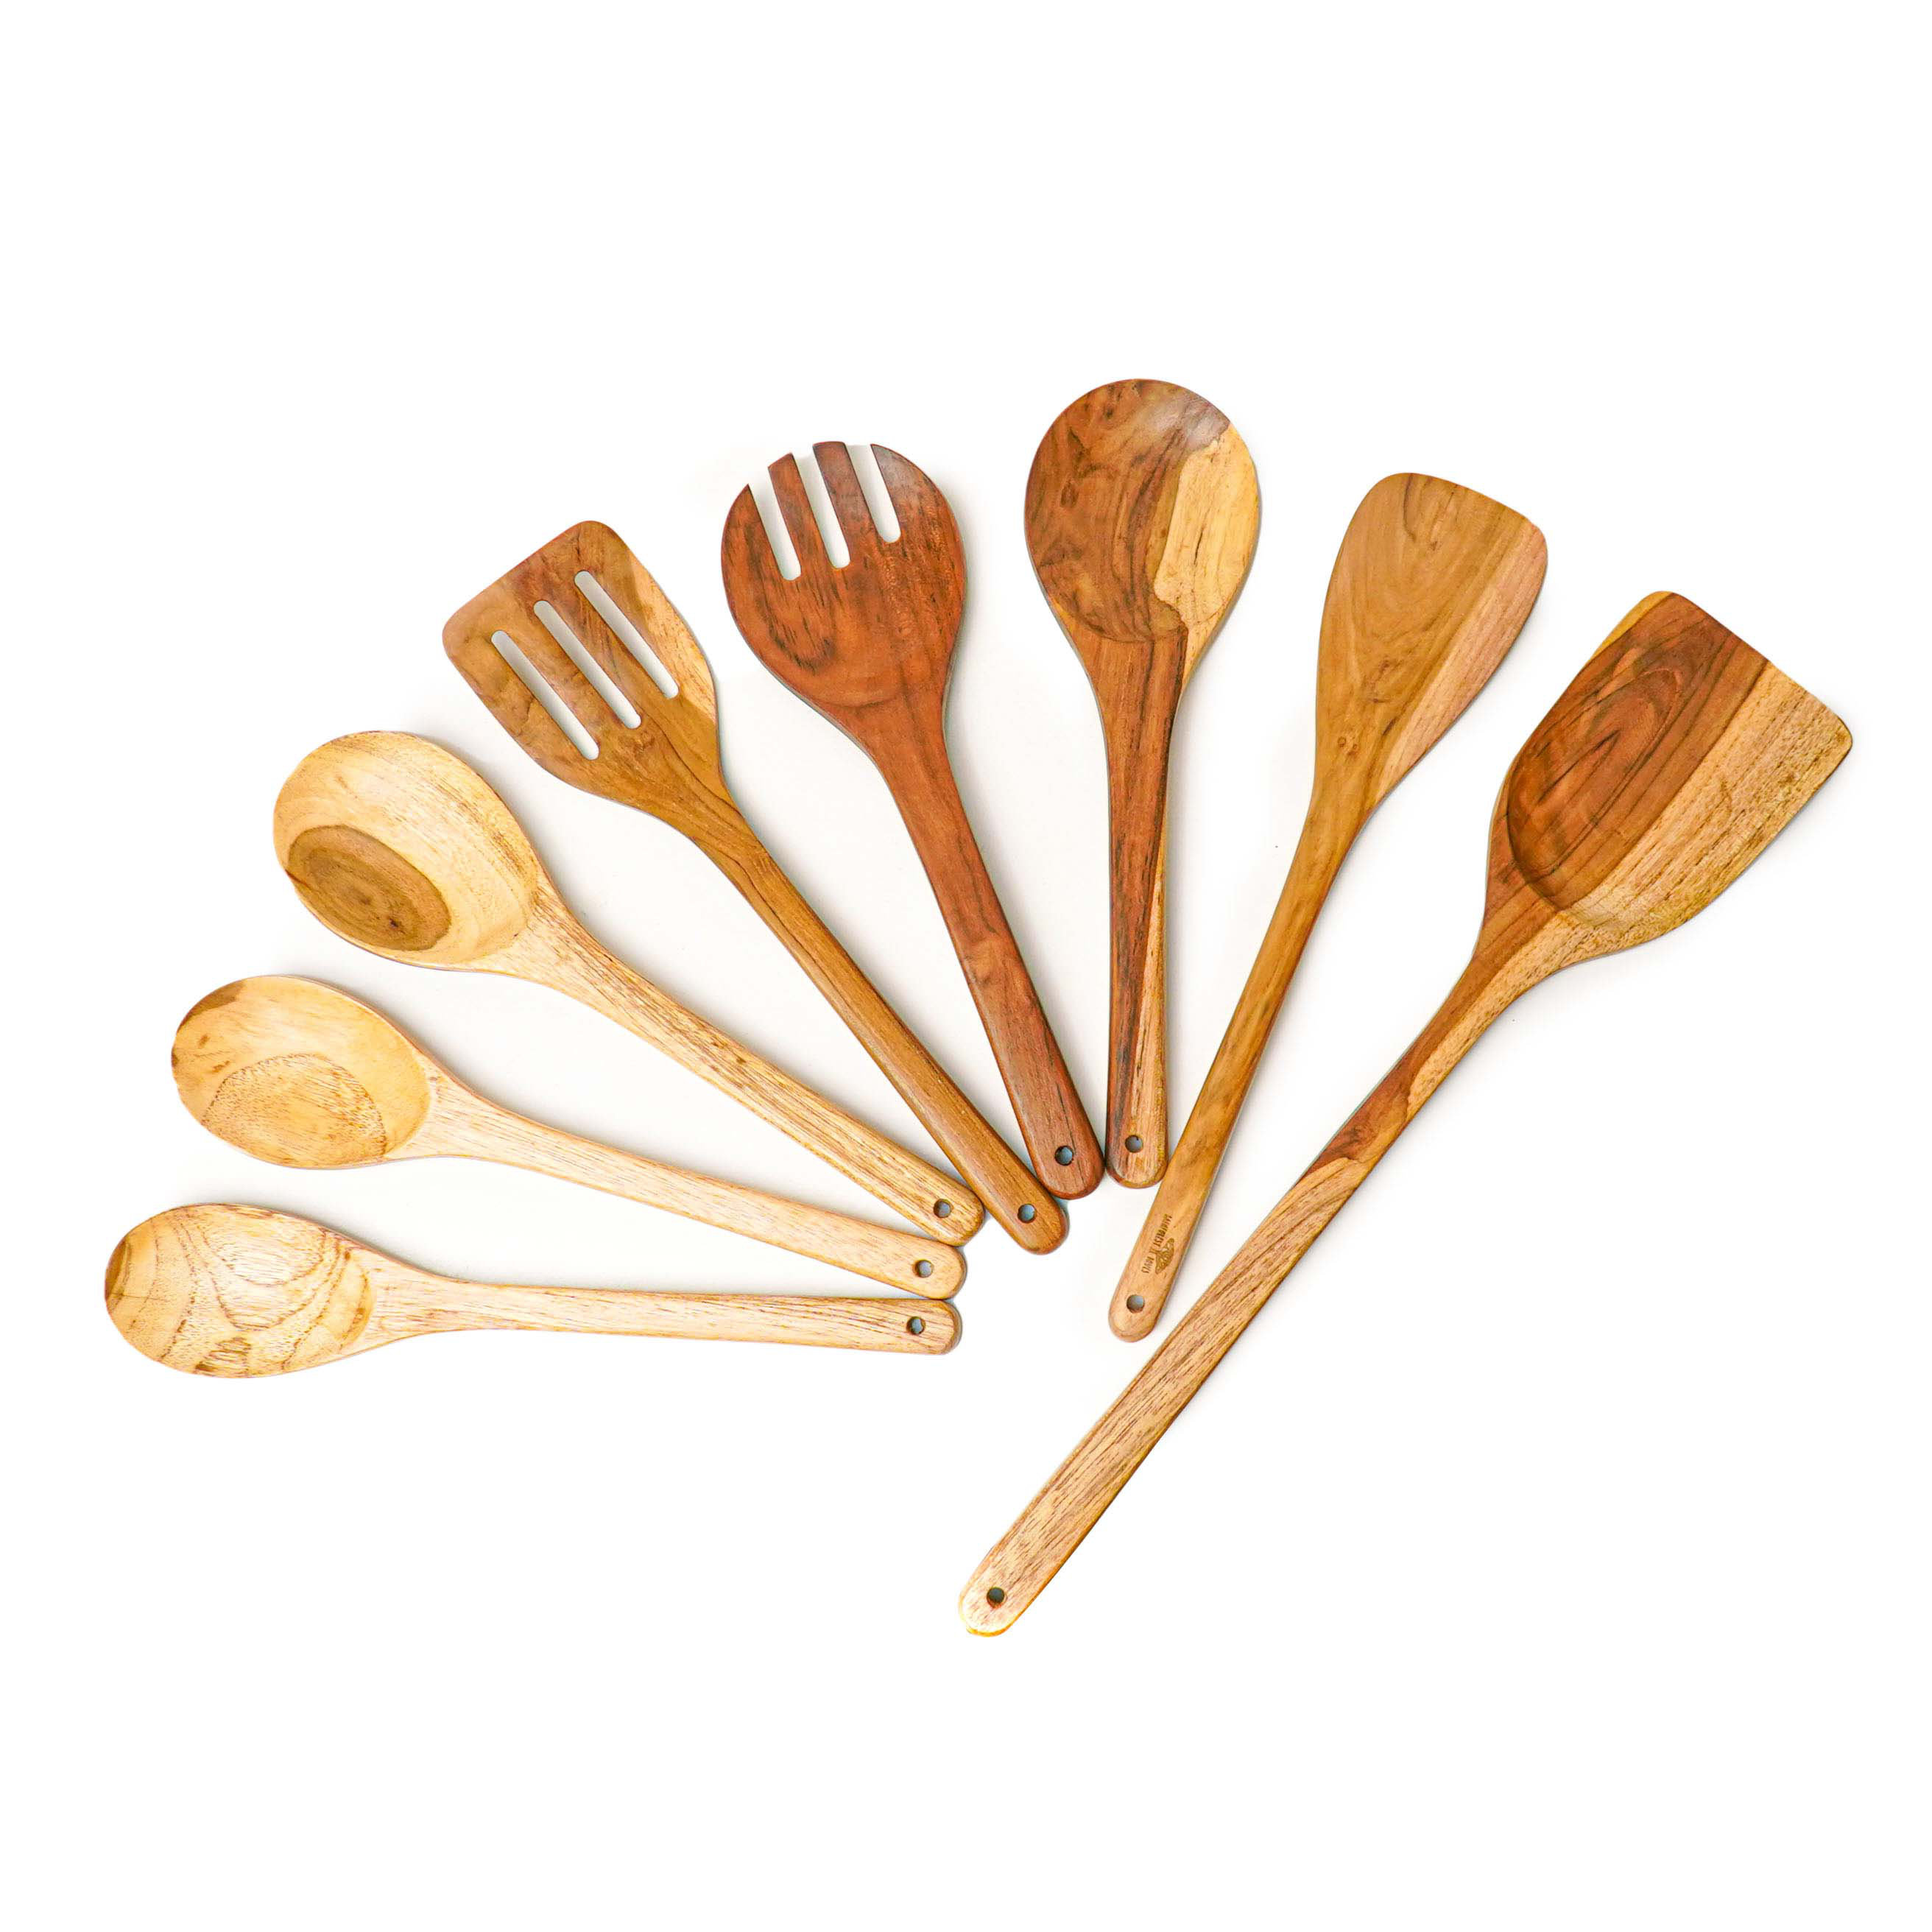 13 pcs Wooden Utensils Teak Wood Kitchen Wooden Spoons for Cooking,Spatula  Set with Wooden Spoon Rest,Tong,Whisk